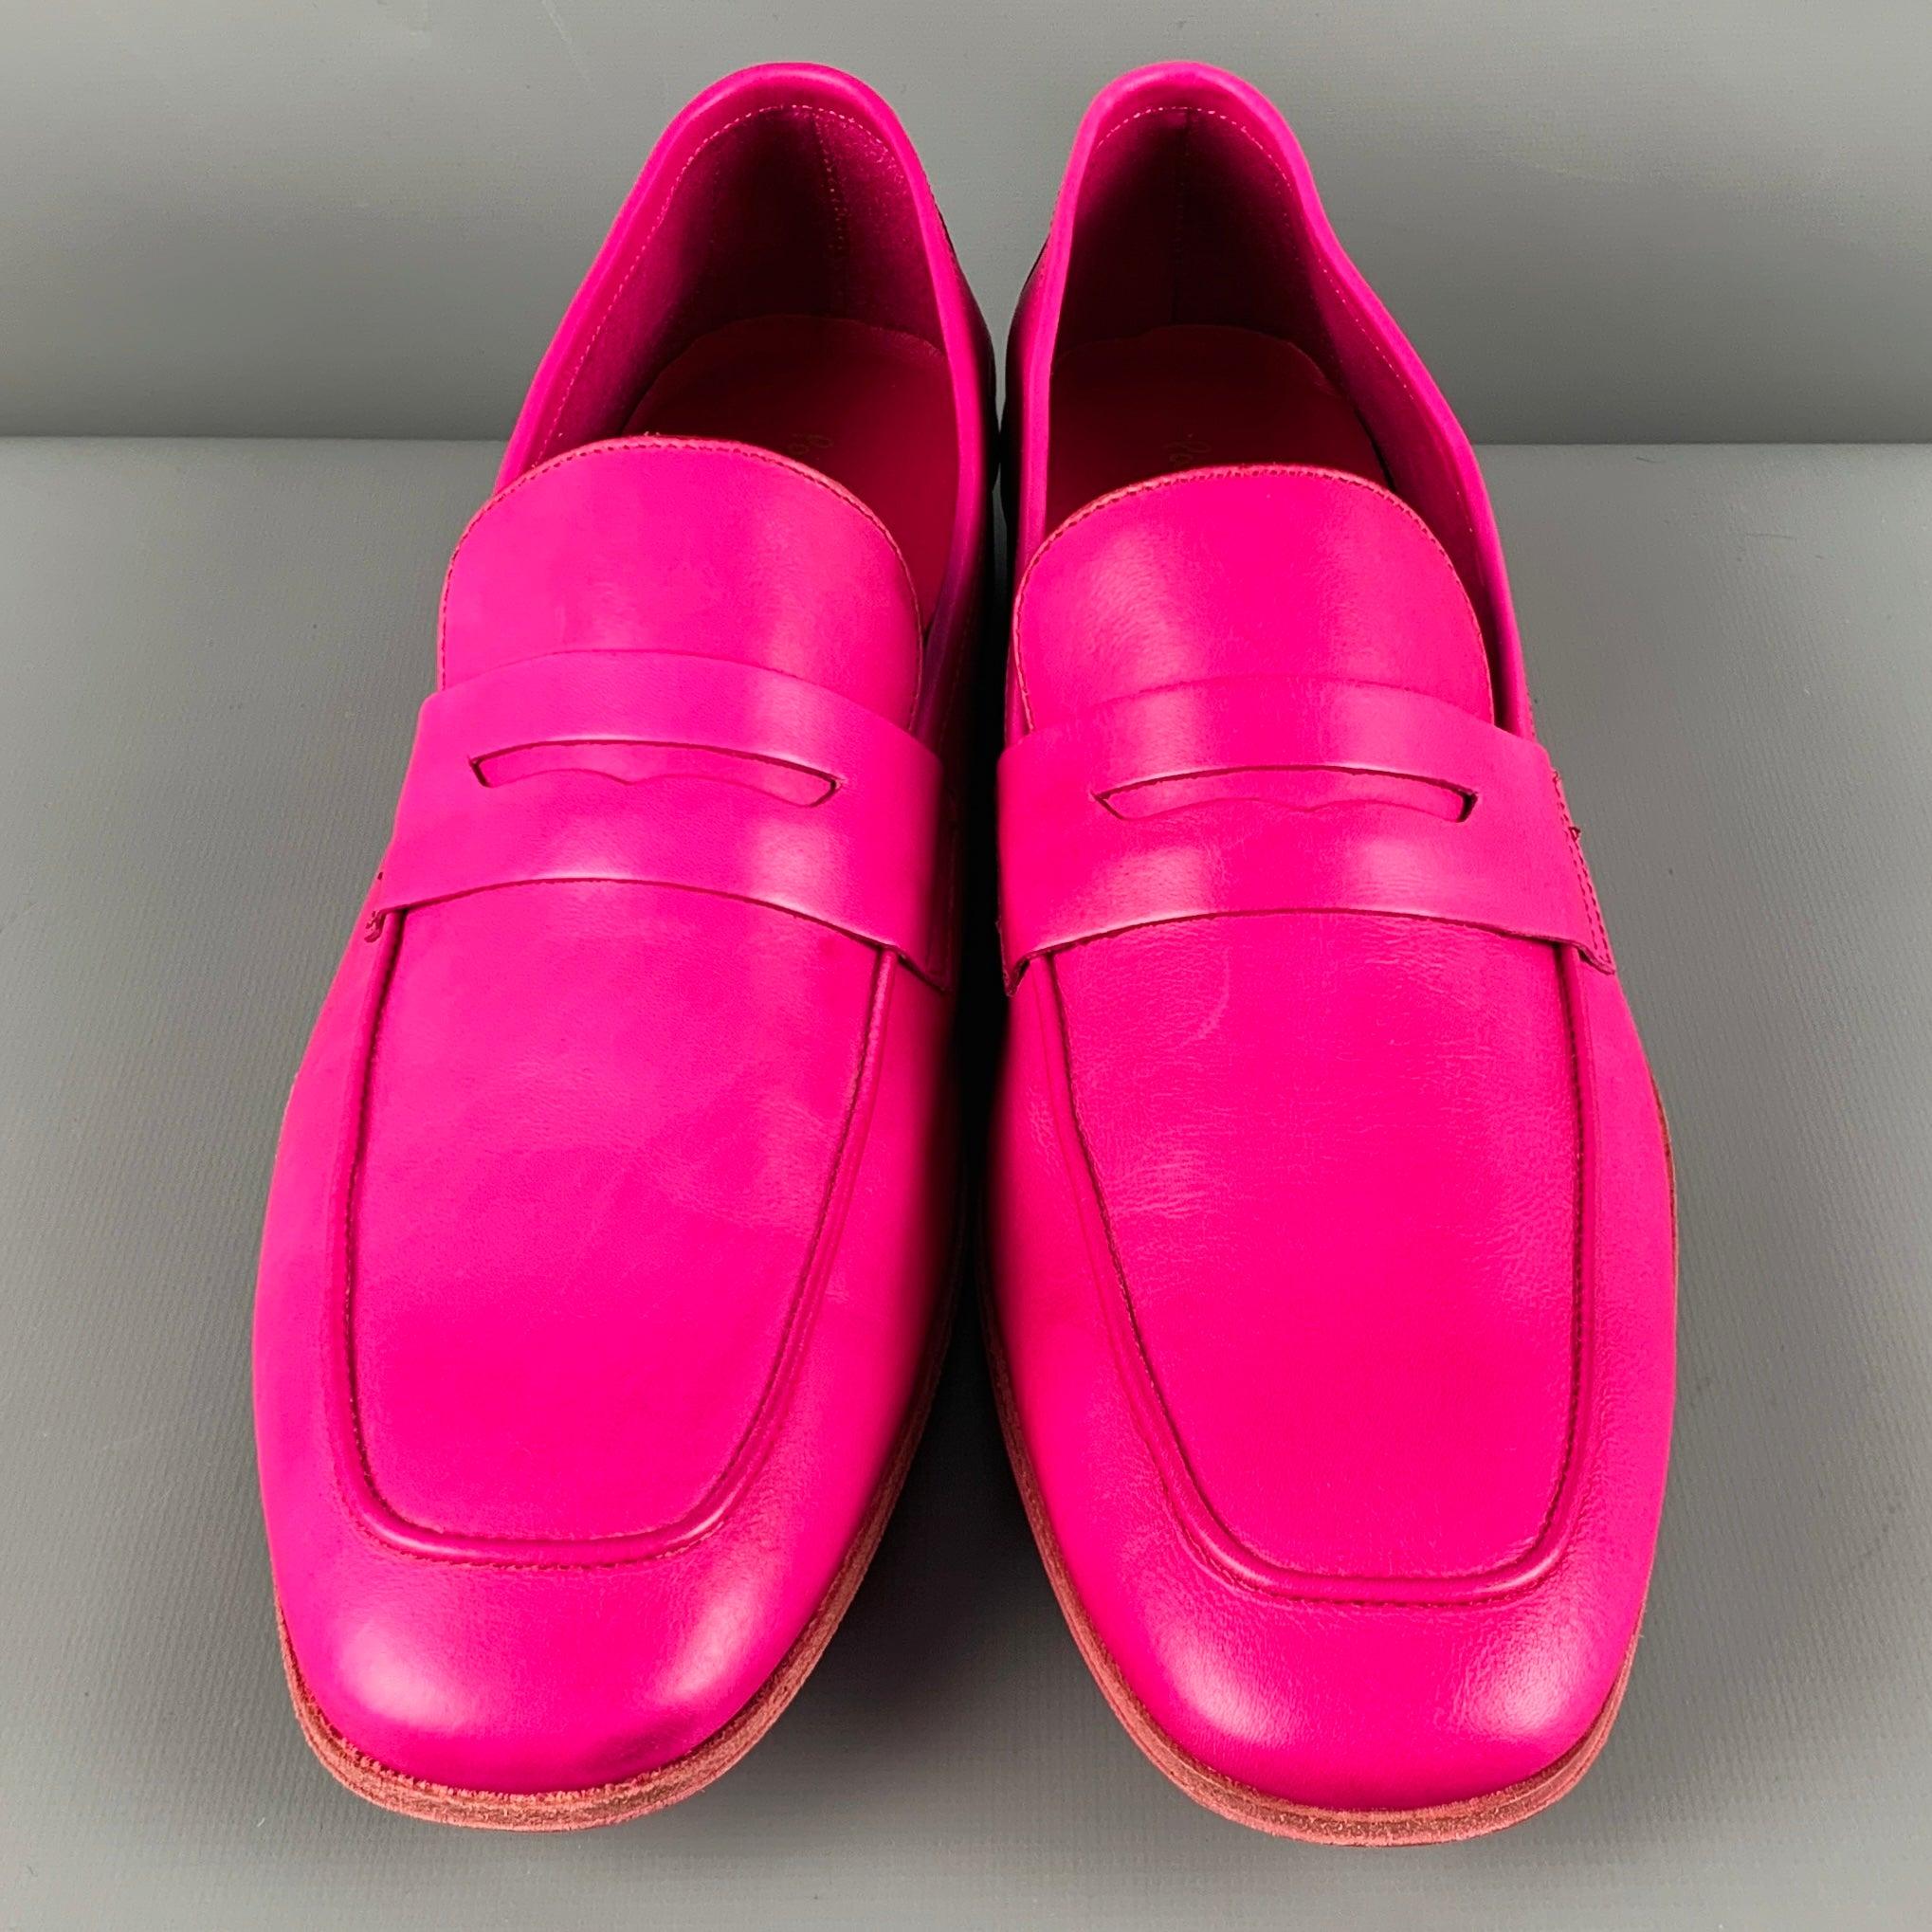 Men's PAUL SMITH Size 10 Fuchsia Pink Leather Slip On Loafers For Sale